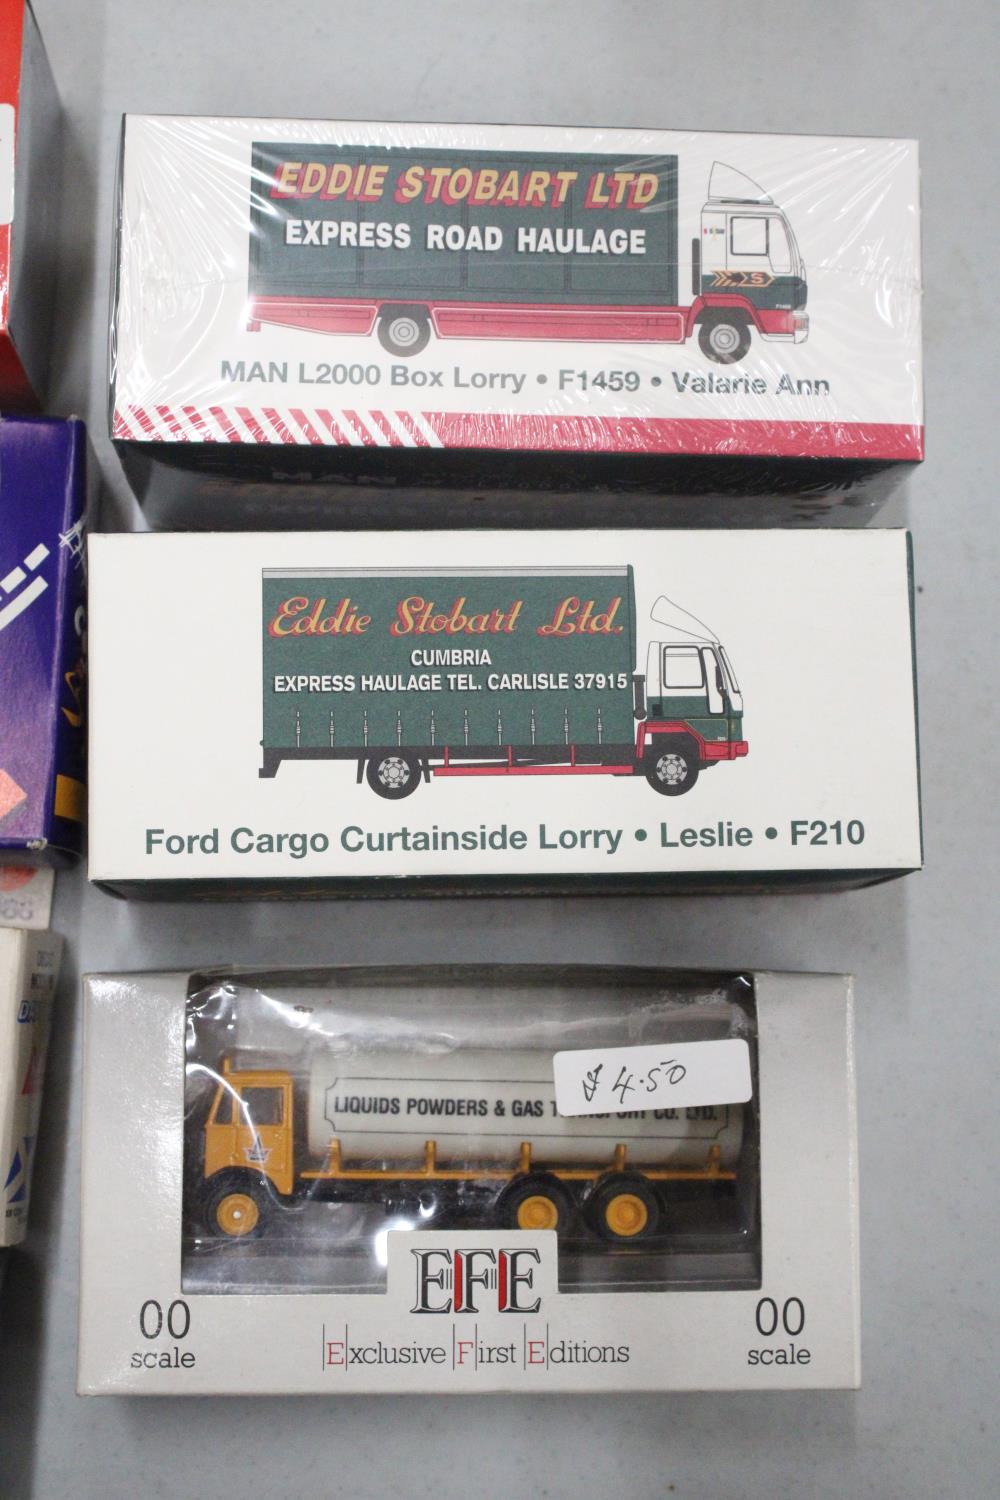 A MIXED COLLECTION OF VARIOUS LORRIES, WAGONS, VANS, BUSES ETC. - Image 2 of 5